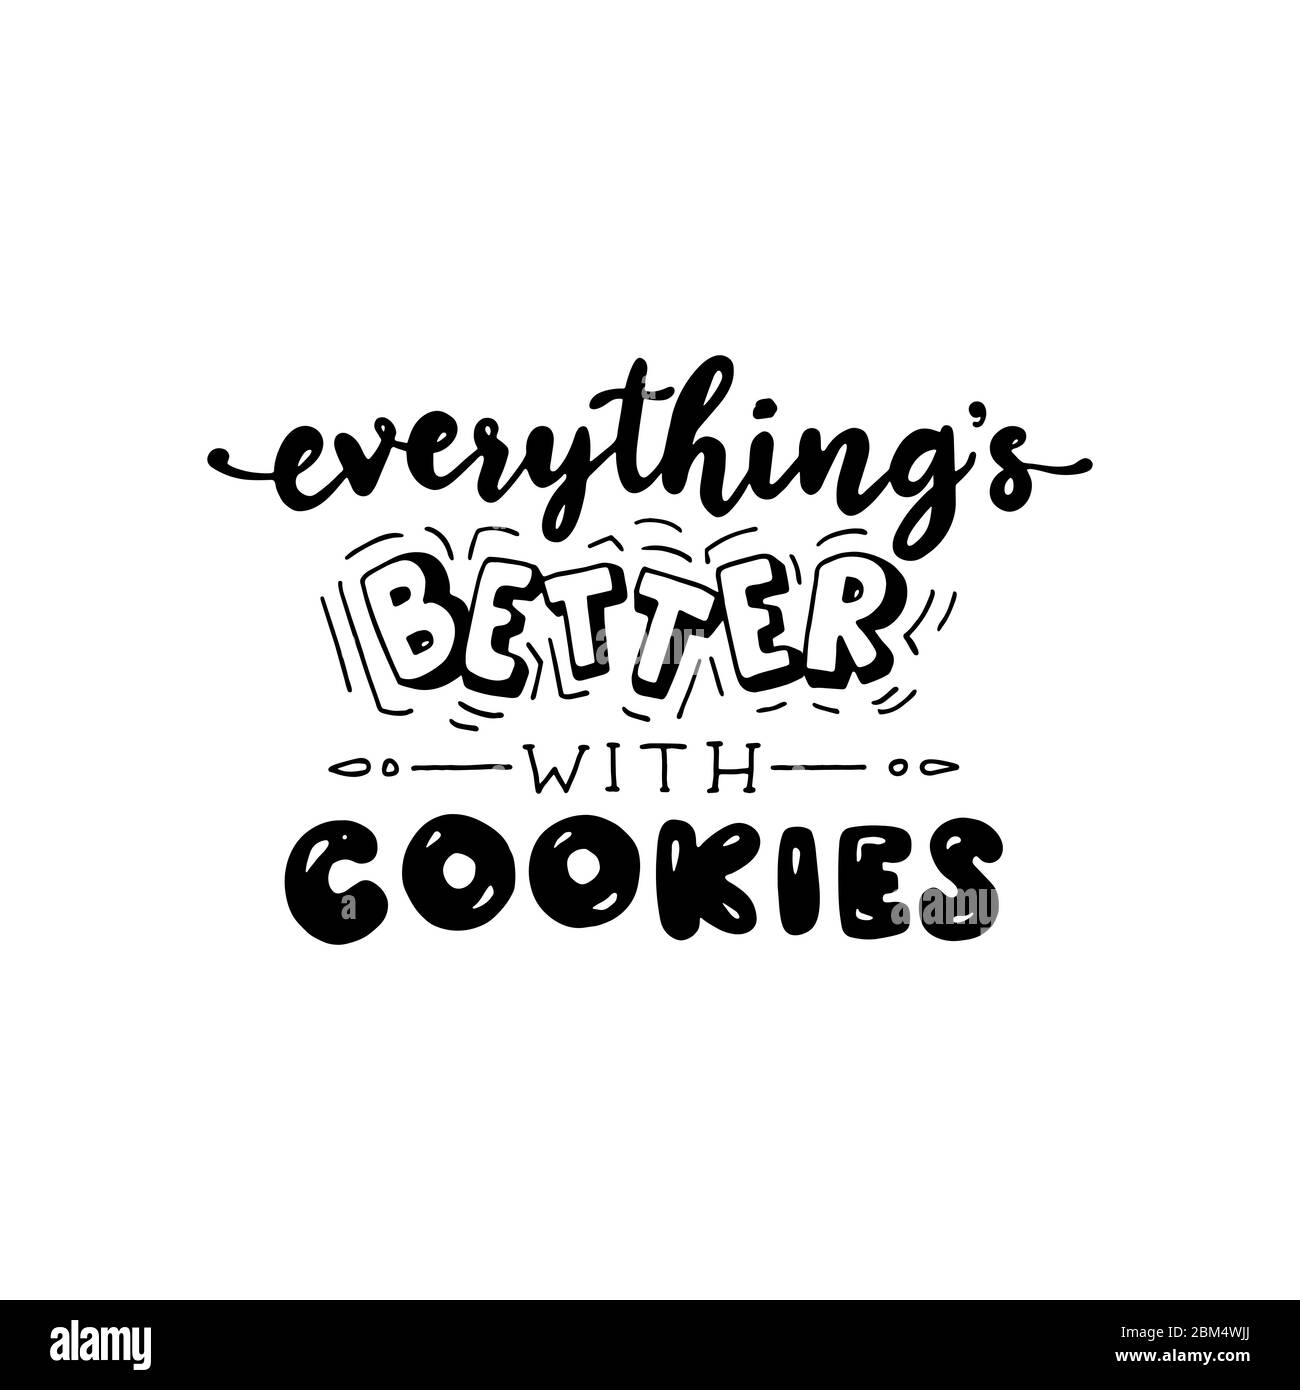 Everything’s better with cookies. Funny lettering quote. Hand drawn text for card, poster, banner, t-shirt, or packaging design. Stock Vector